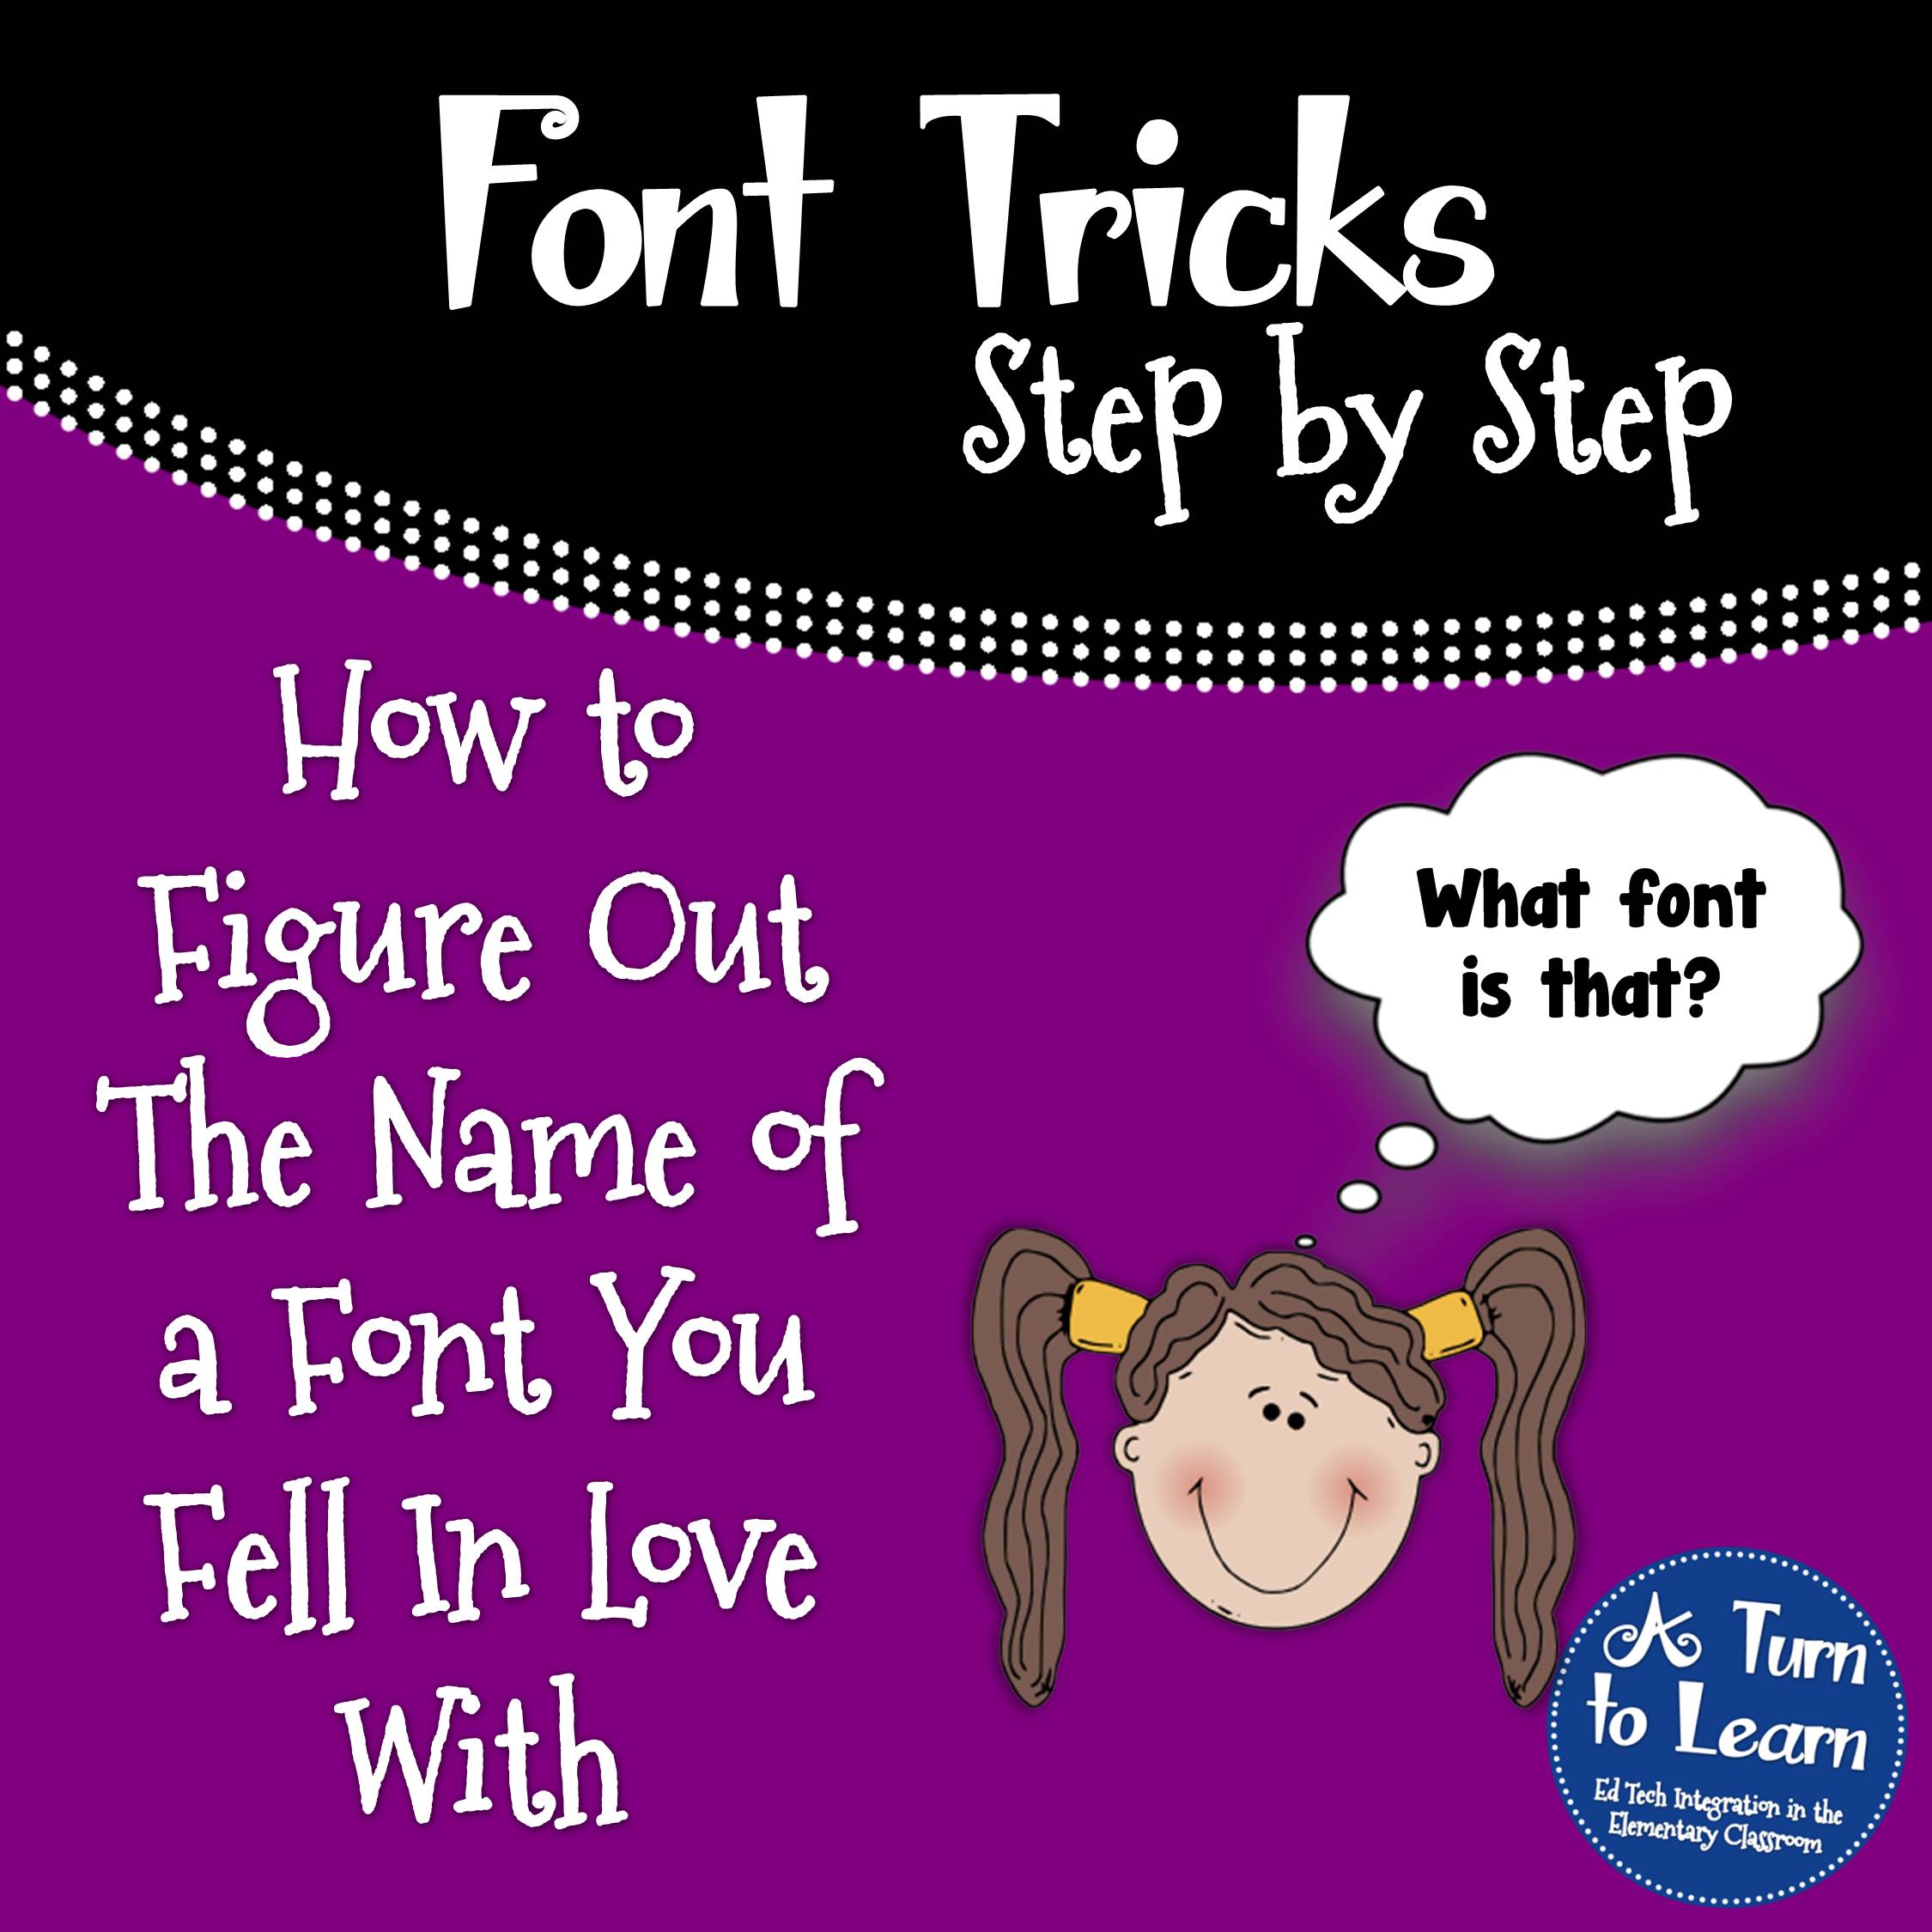 How to Figure Out the Name of a Font You Fell in Love With